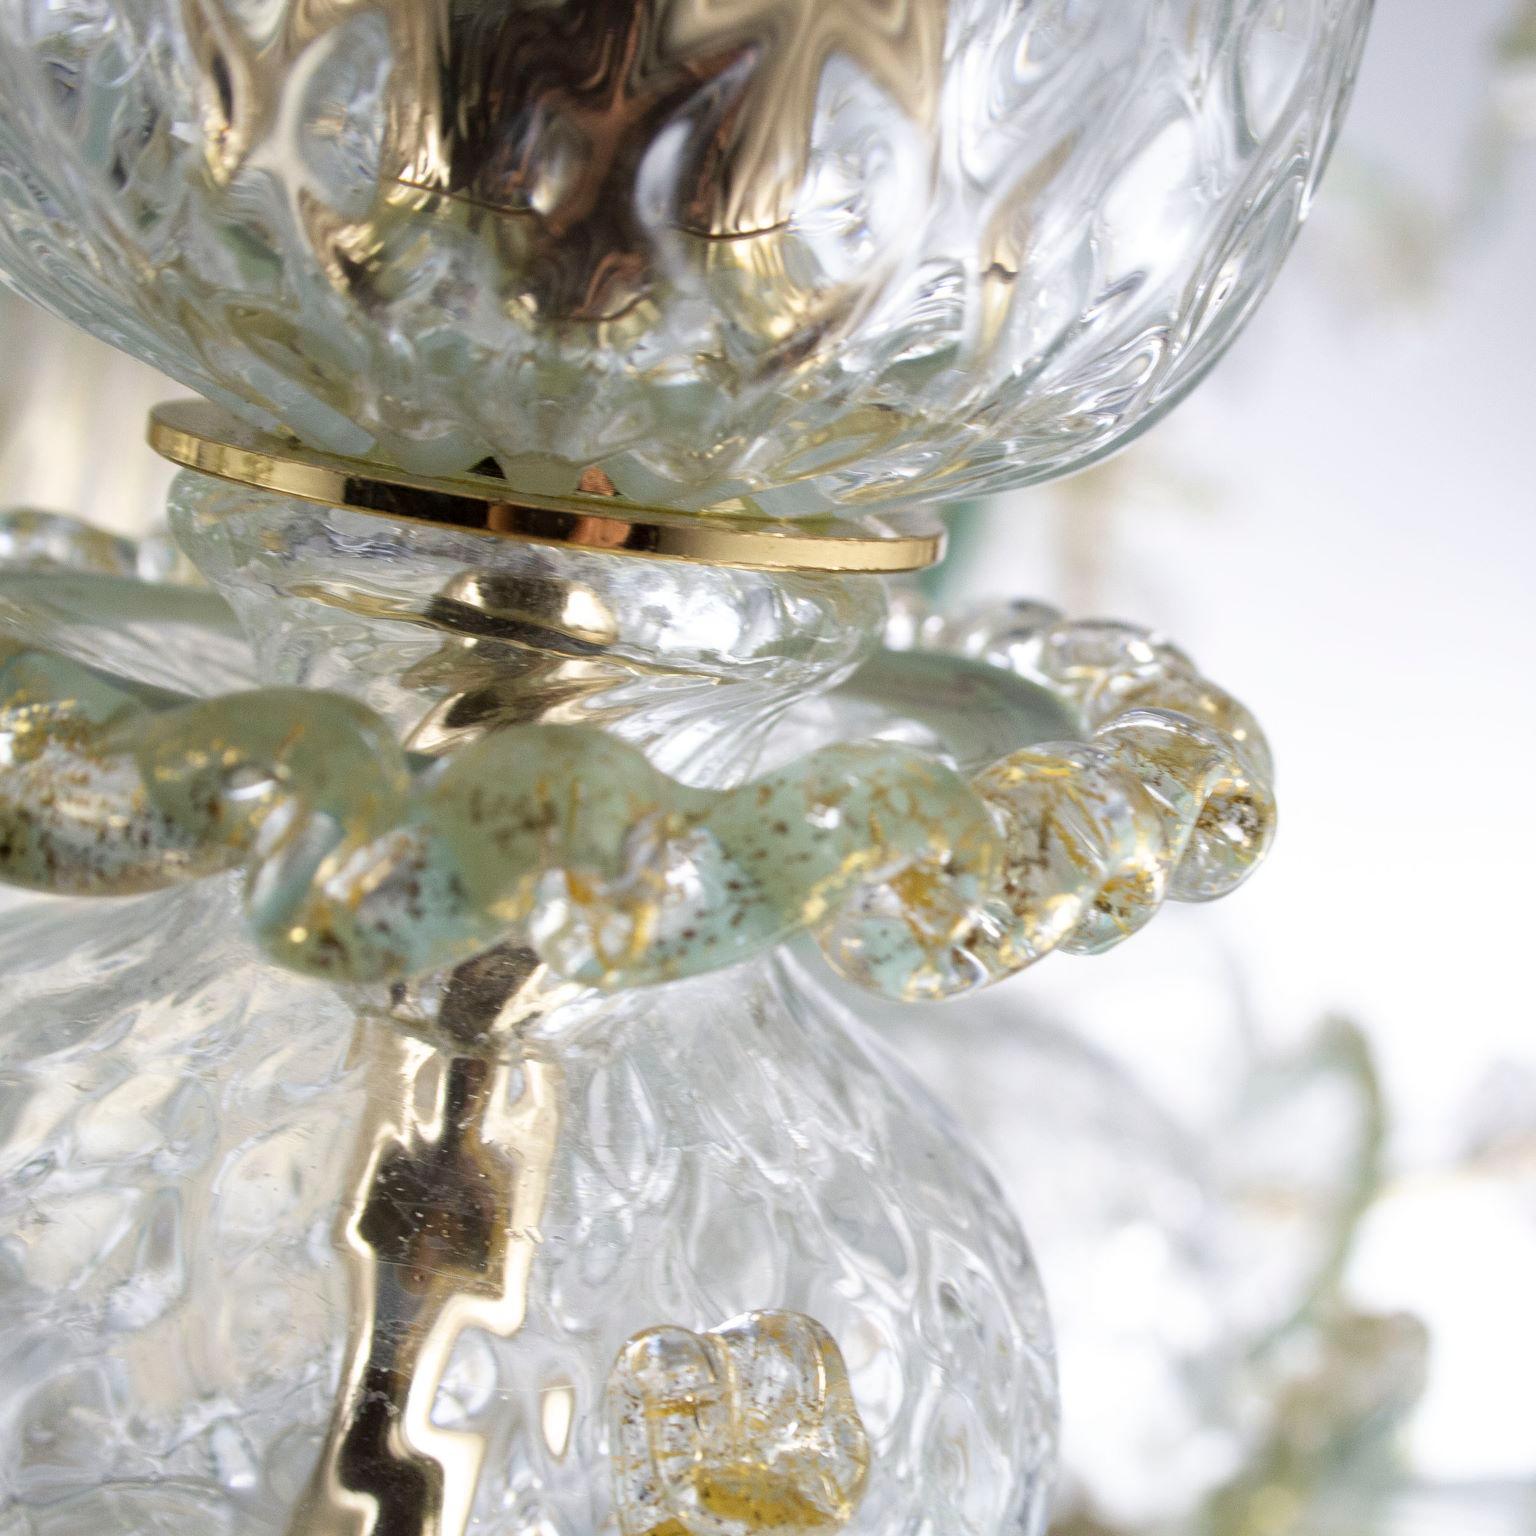 Rezzonico chandelier 10 arms, crystal Murano glass, with gold, grey-green color particulars in vitreous paste by Multiforme.
This artistic glass chandelier is an elegant and delicate lighting work, colored with pastel tones. The structure is a